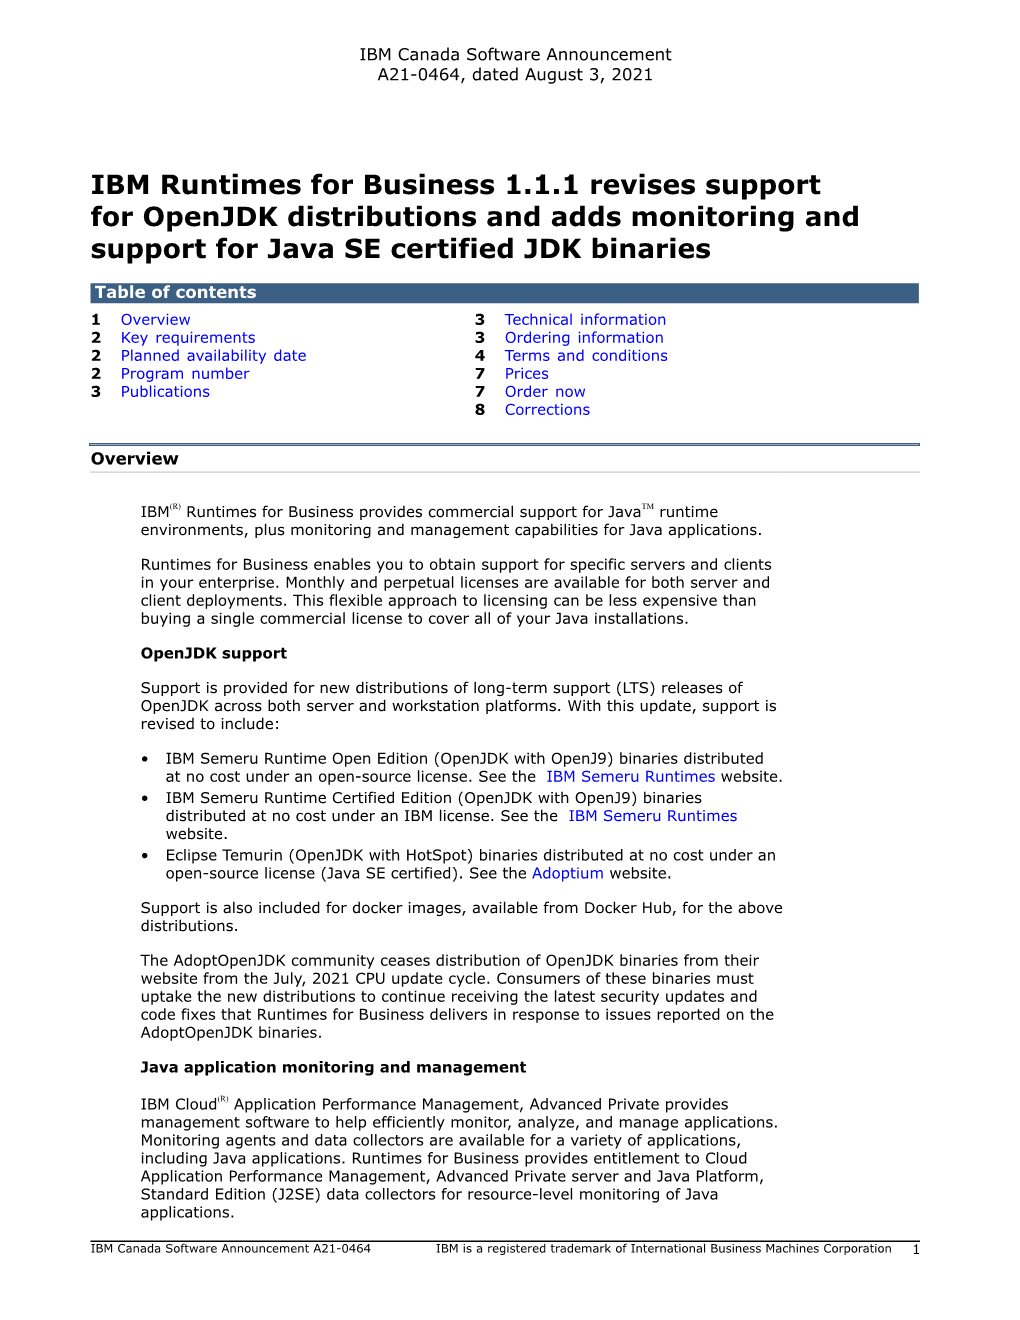 IBM Runtimes for Business 1.1.1 Revises Support for Openjdk Distributions and Adds Monitoring and Support for Java SE Certified JDK Binaries